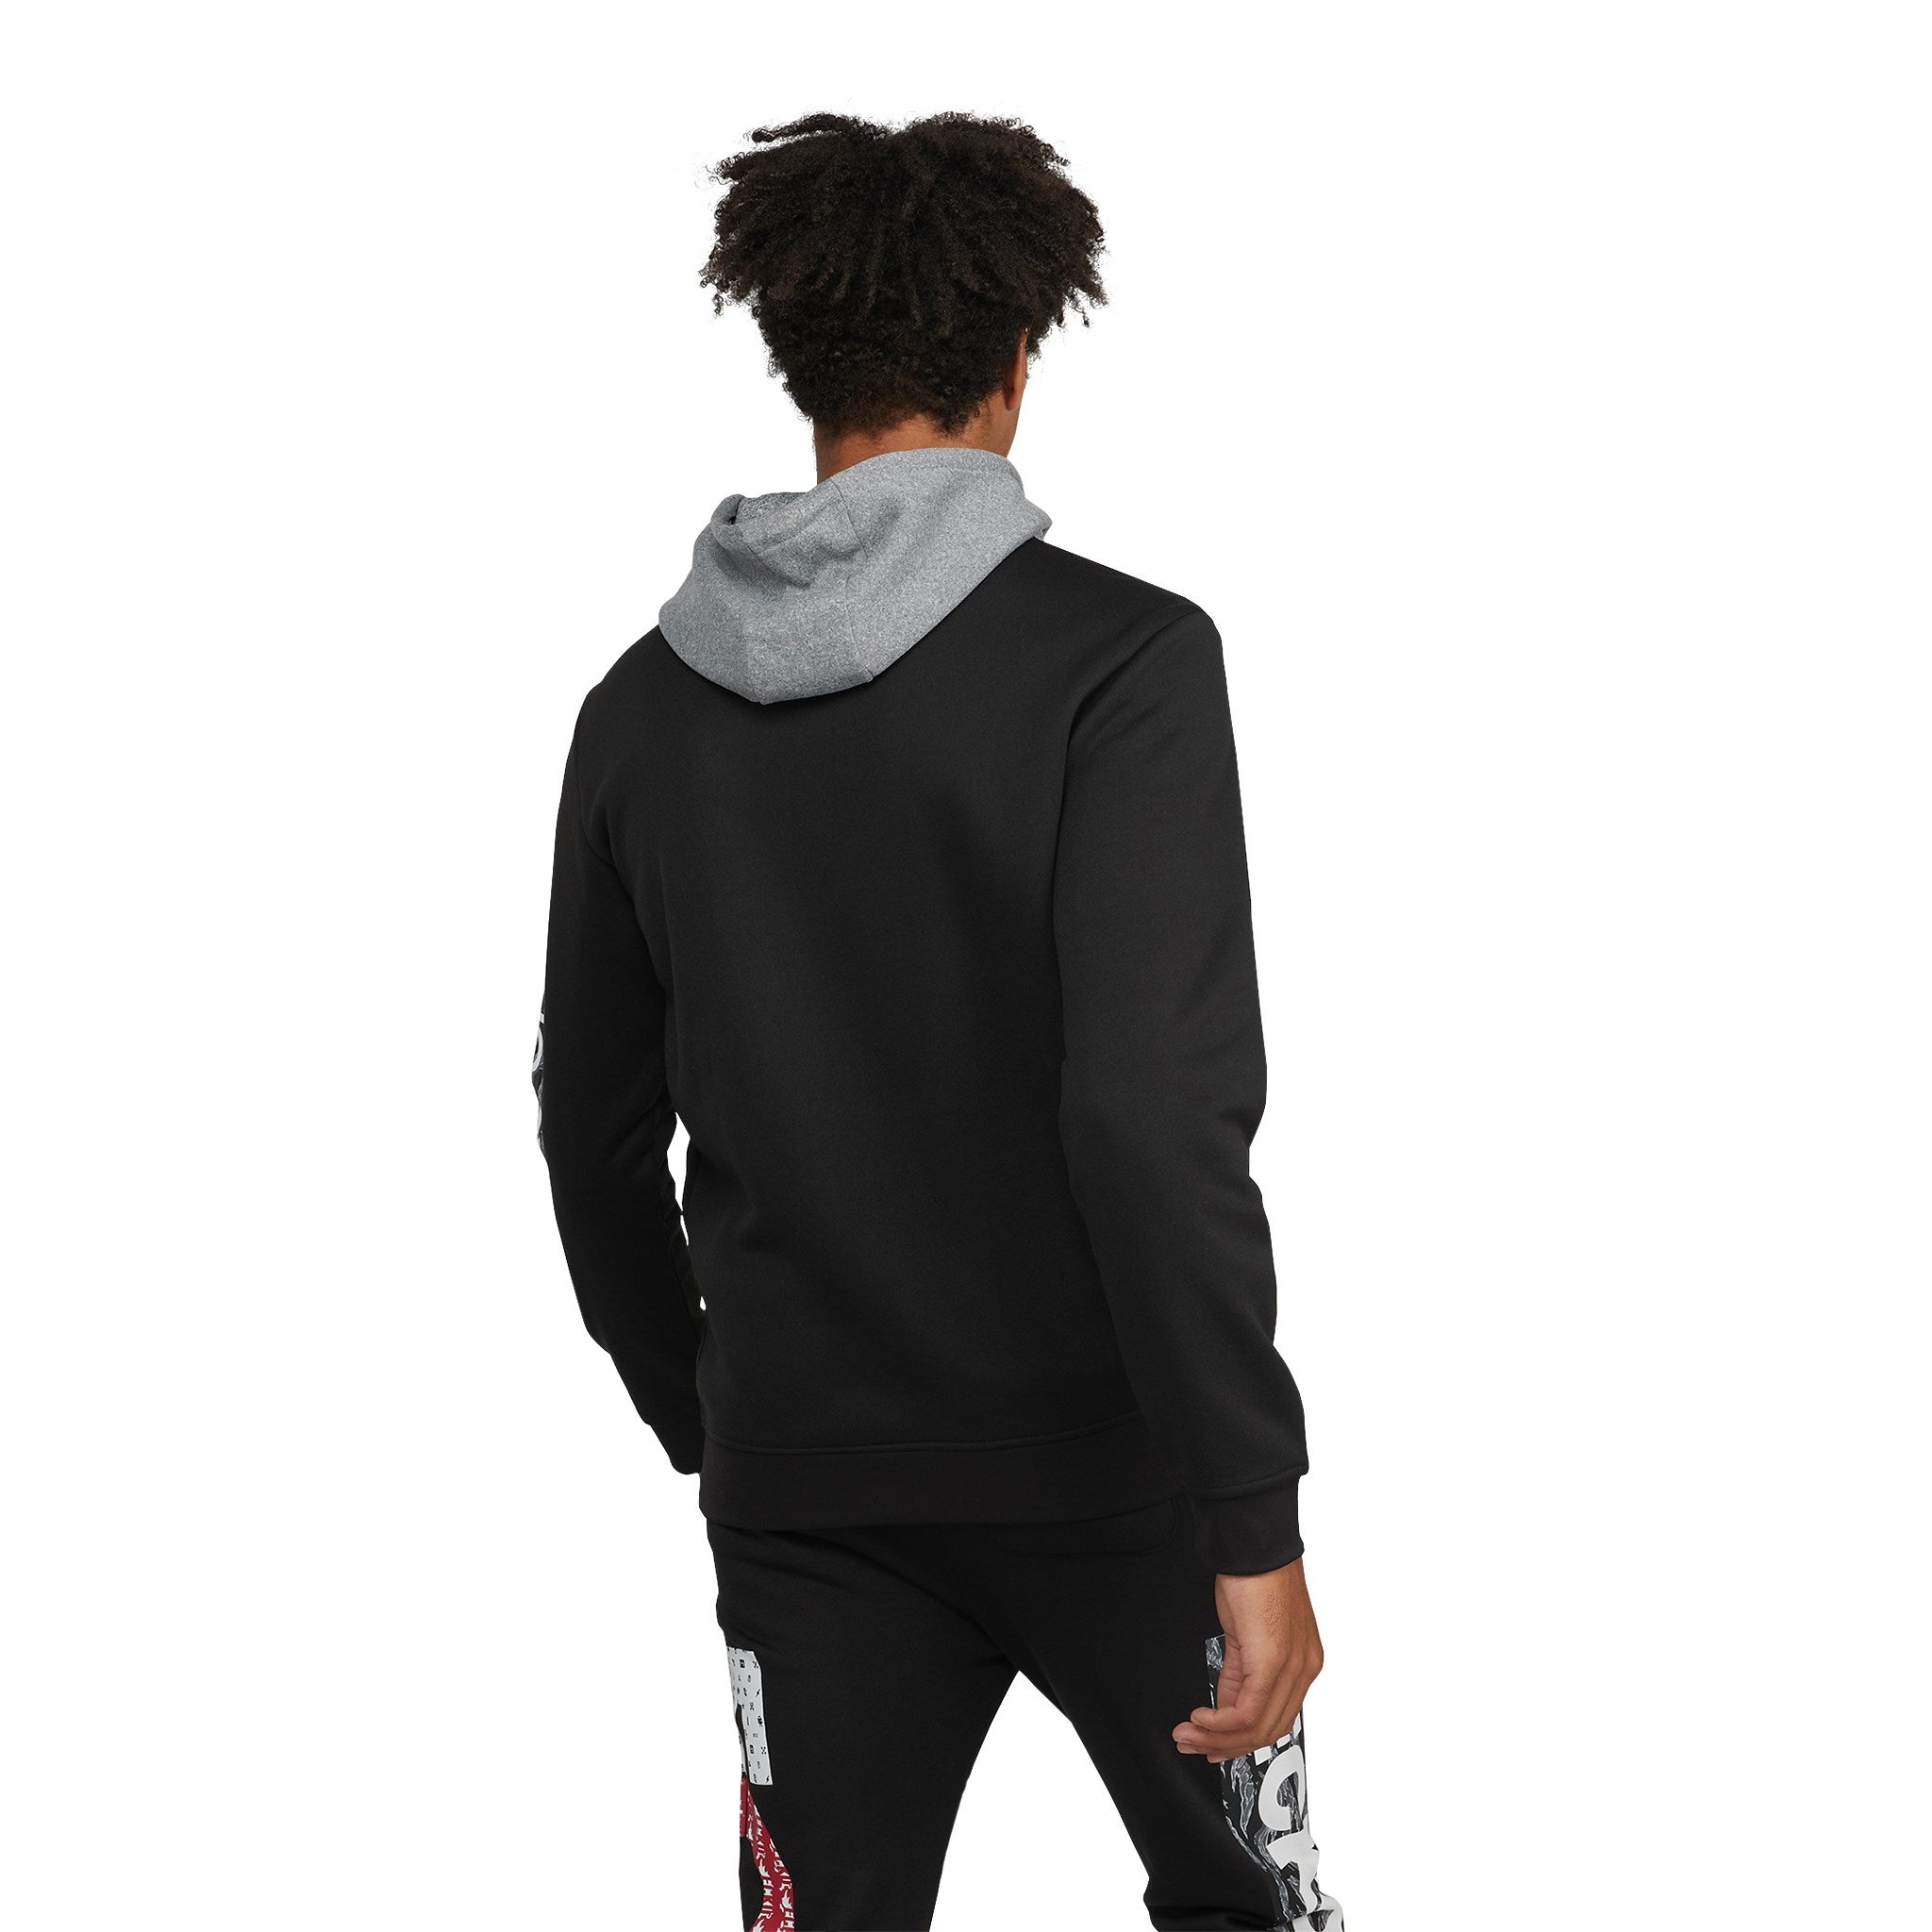 The Line Up Pullover Hoodie